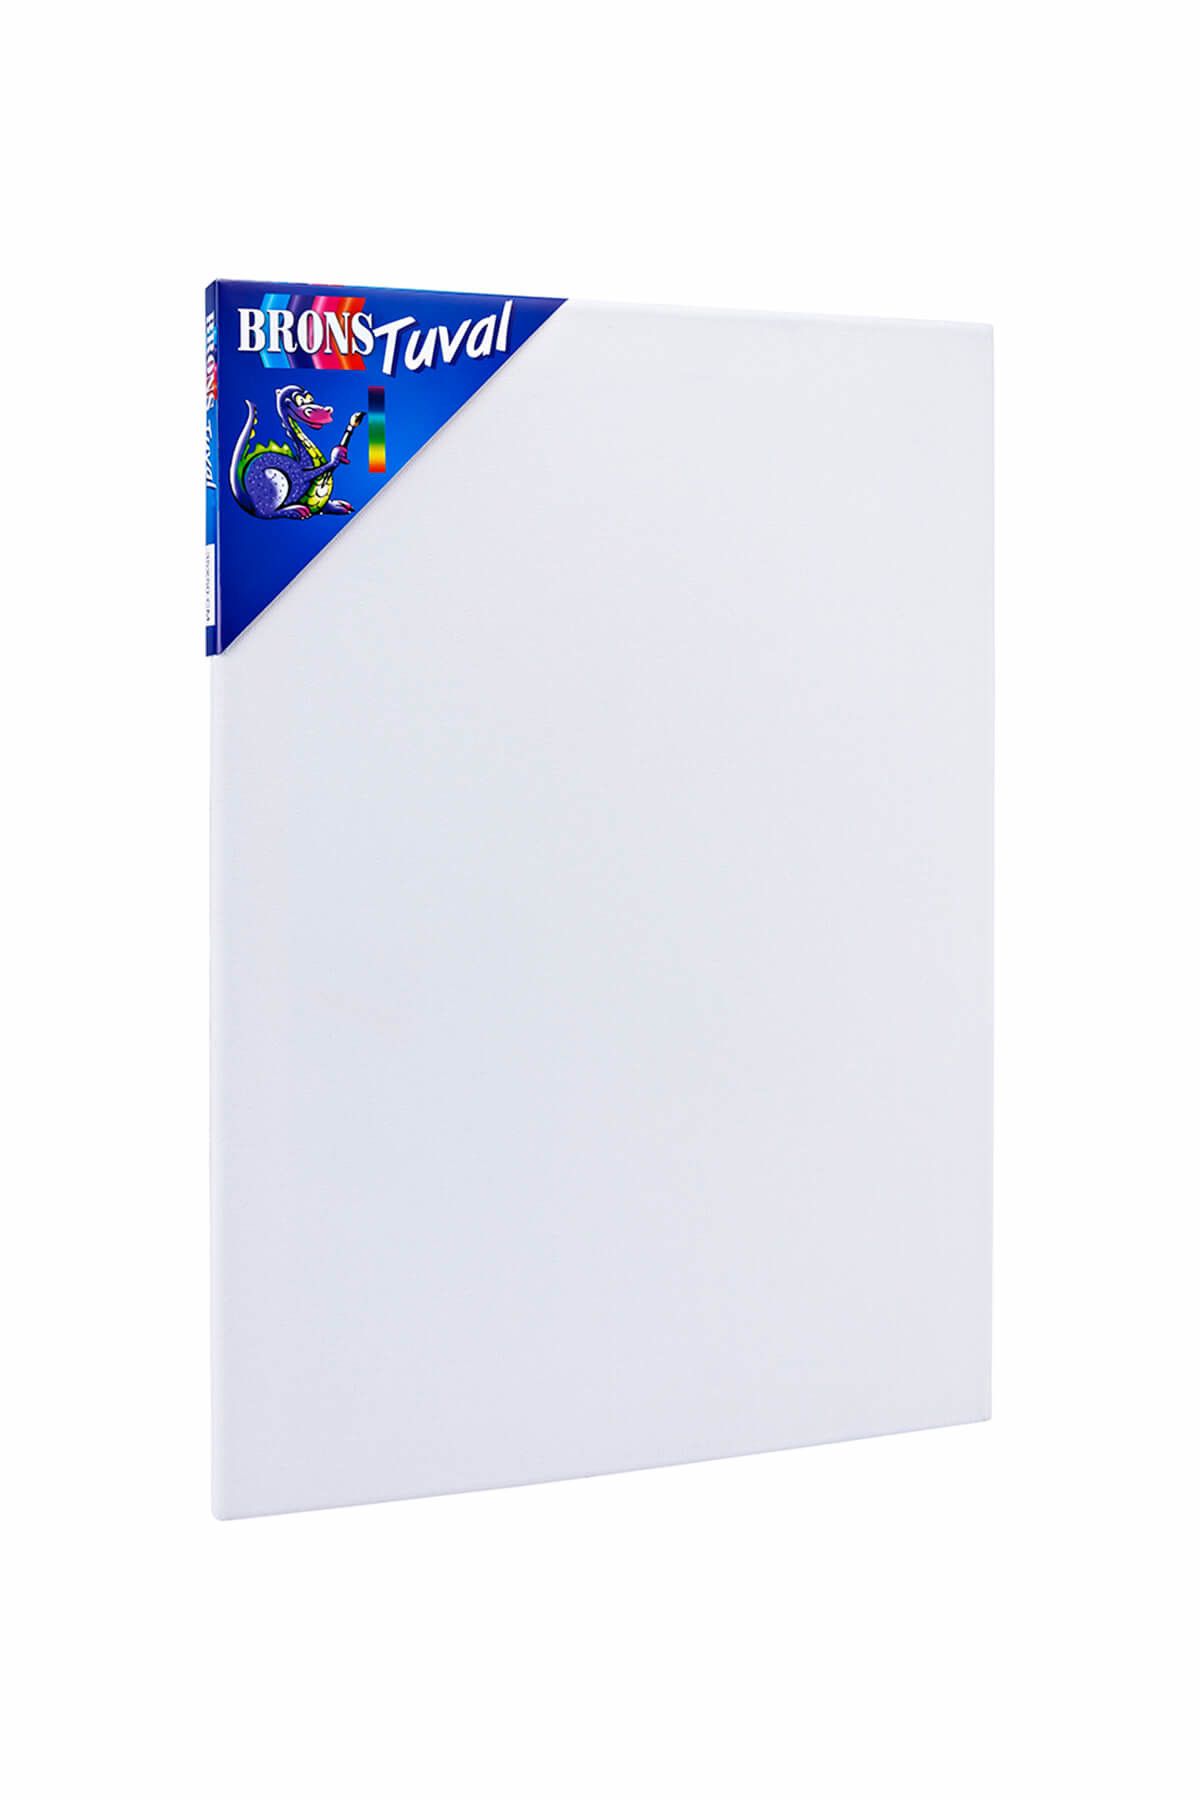 Brons 35X50 Tuval Br-336